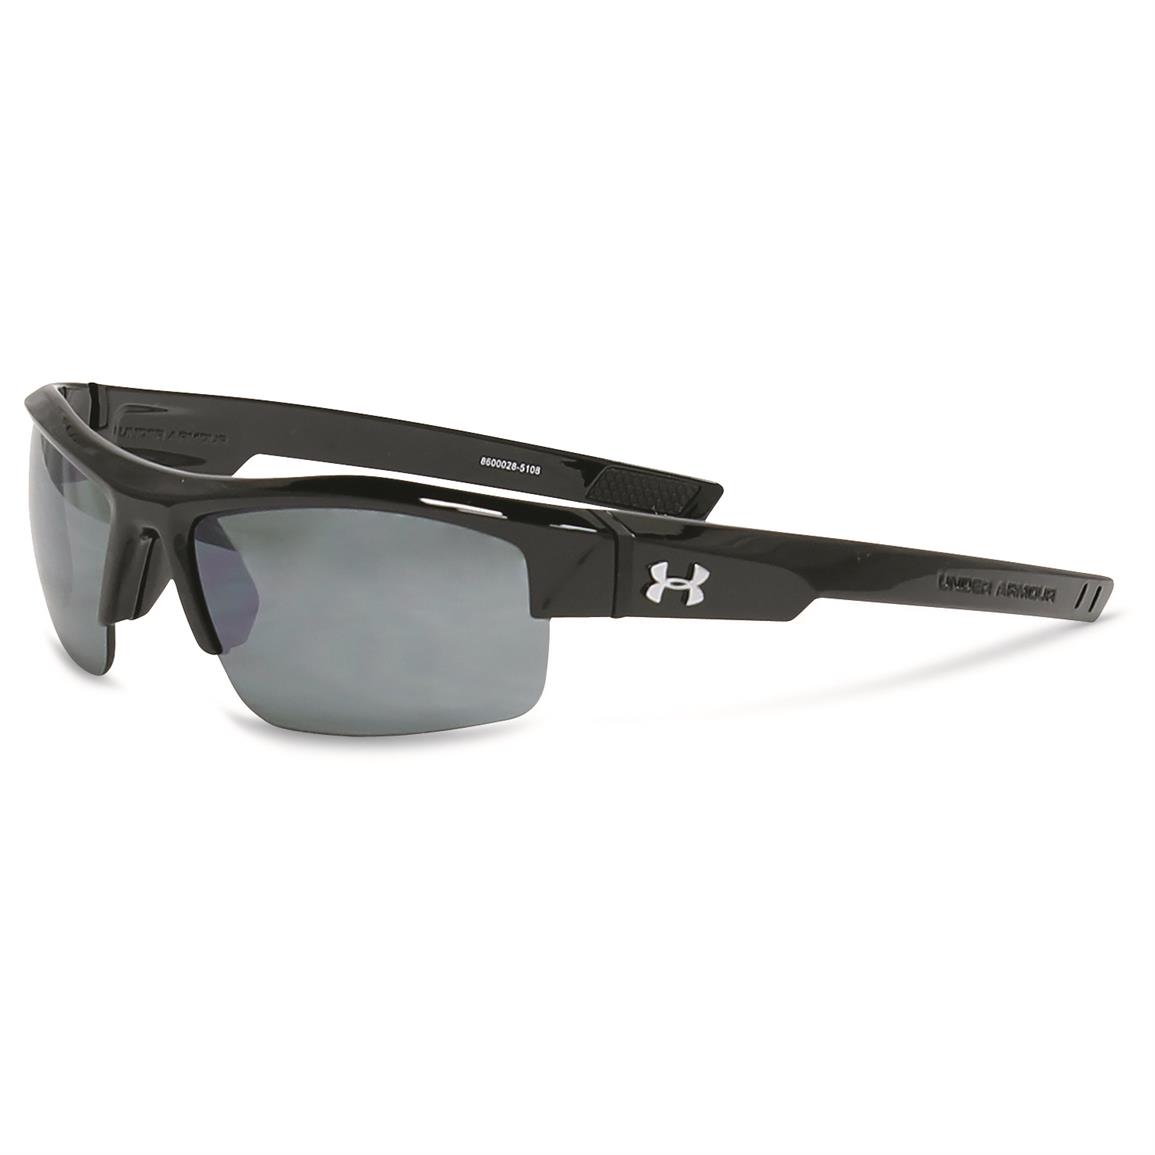 who makes under armour sunglasses Sale 